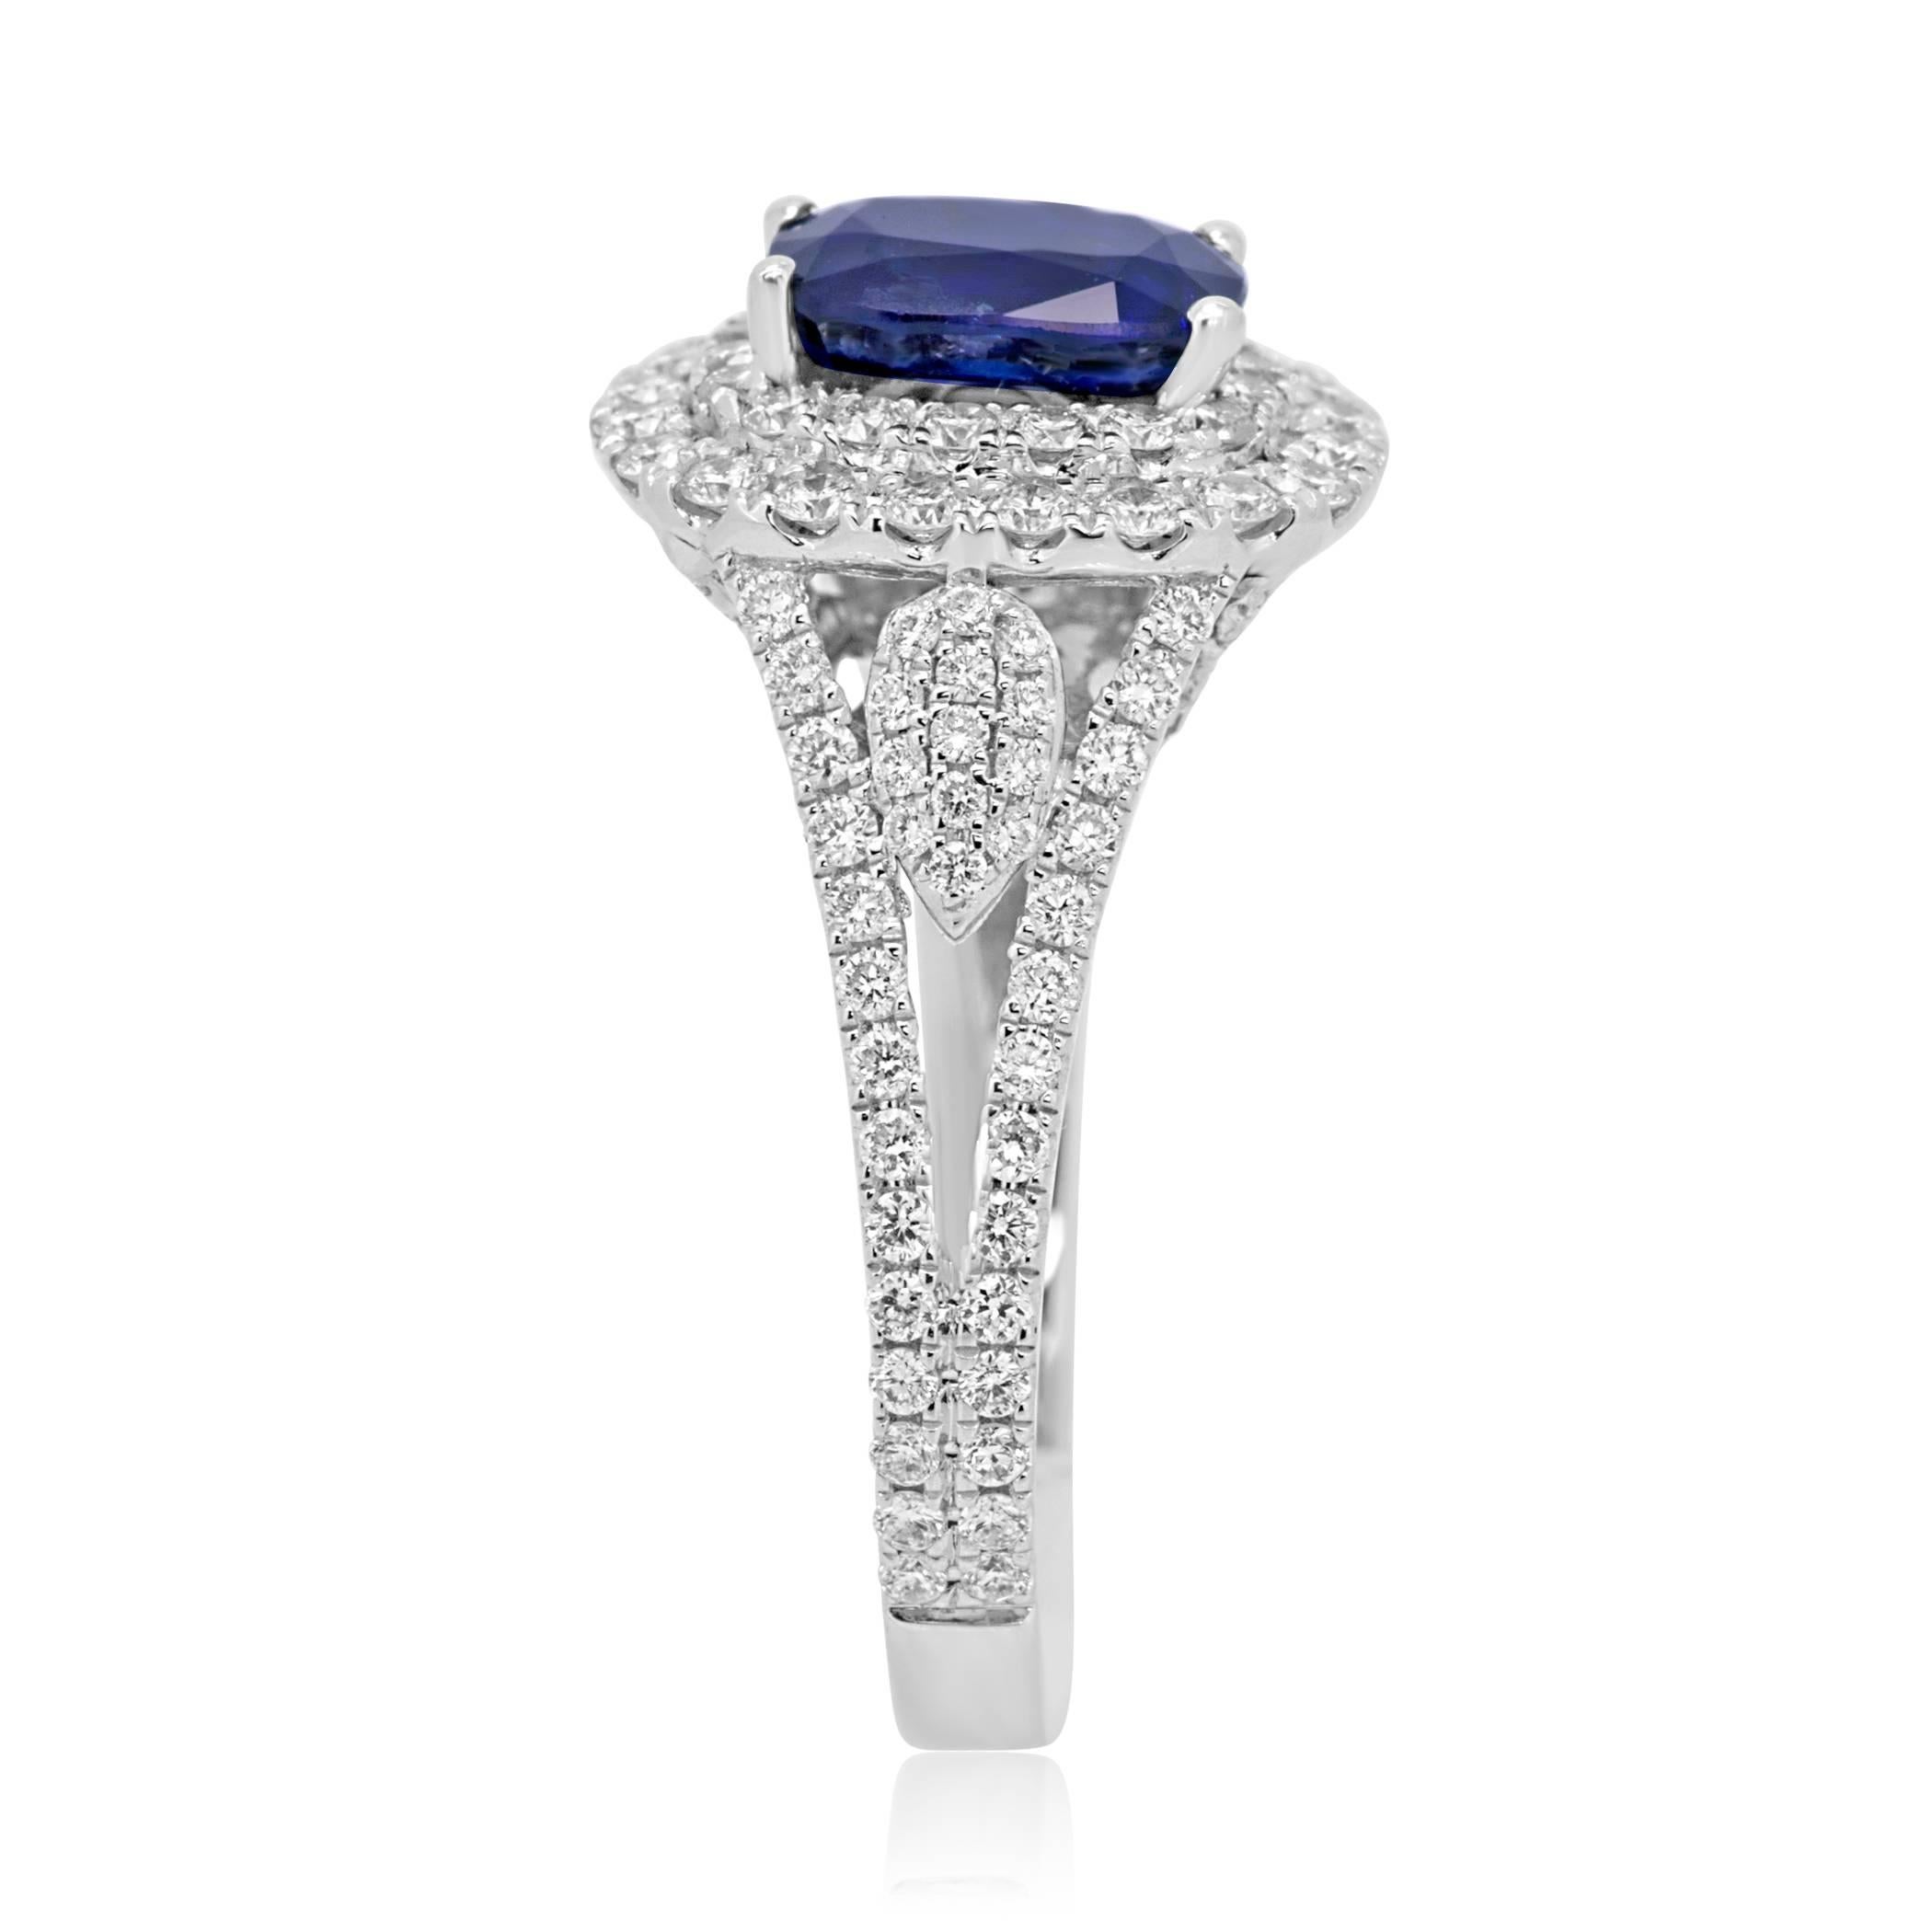 Gorgeous Blue Sapphire Cushion 1.53 Carat encircled in a double Halo of White Diamond 1.05 Carat in Stunning 14K White Gold Bridal Fashion Split Shank Ring.

Style available in different price ranges. Prices are based on your selection of 4C's Cut,